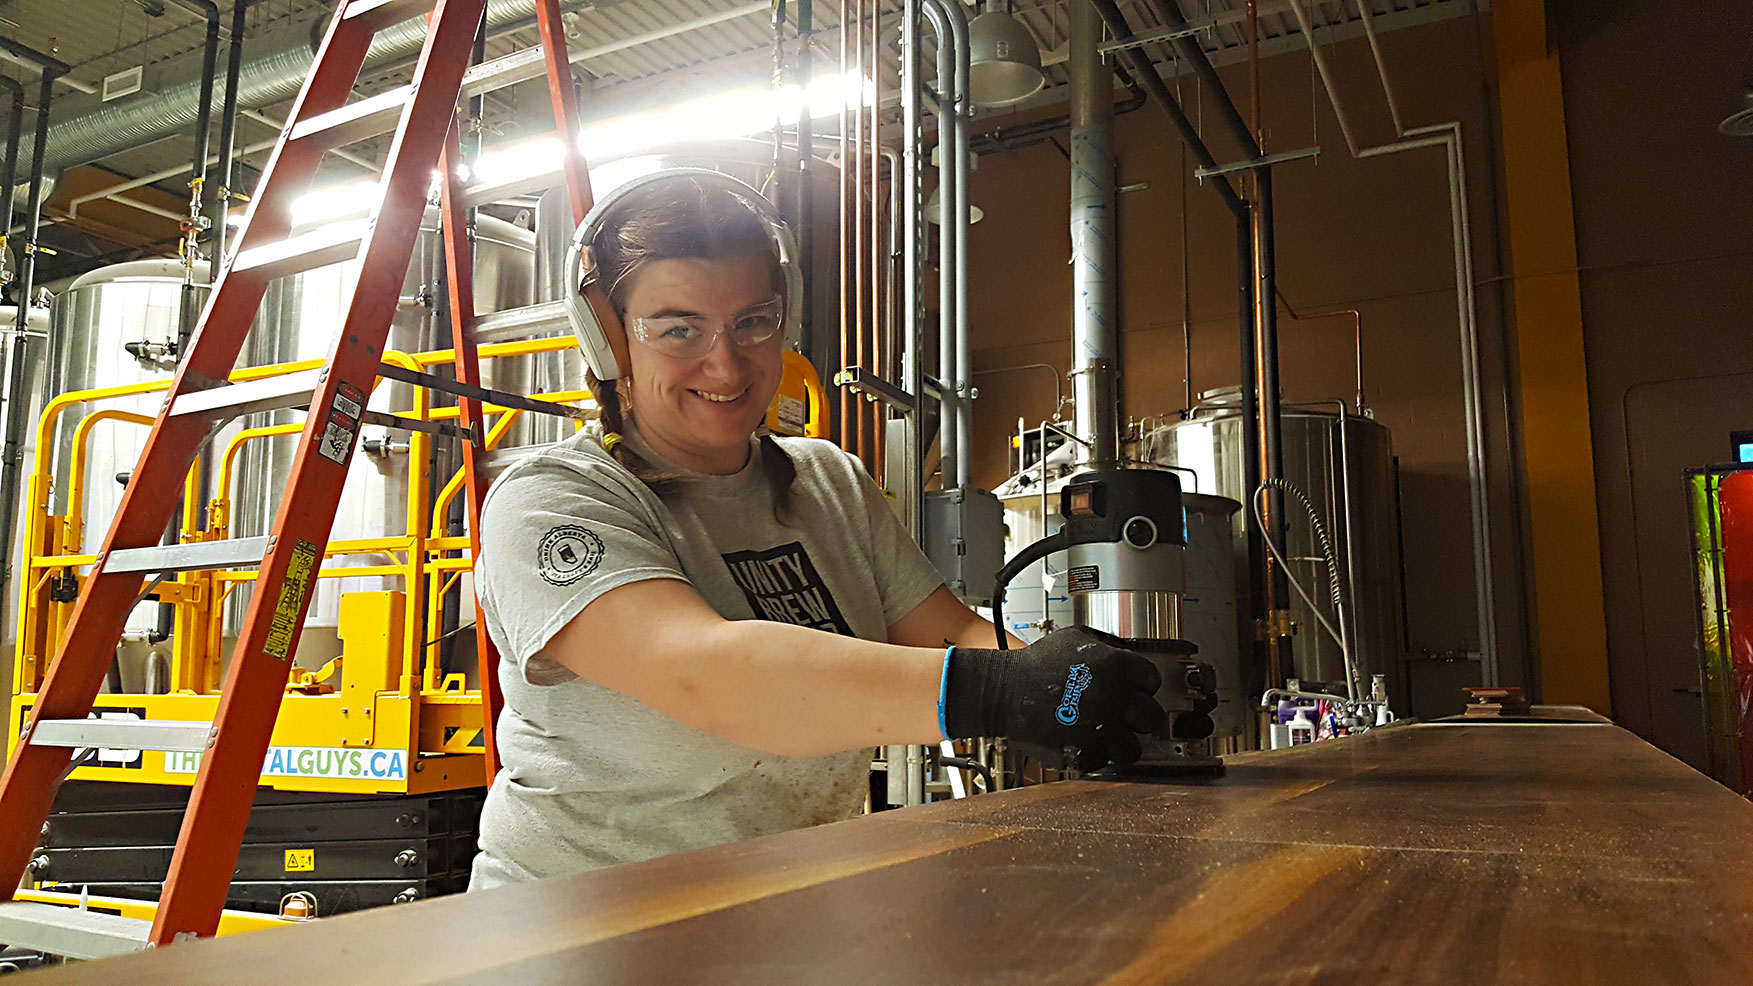 Founder Laura uses a router to trim countertop laminate on our brewery pony wall prior to our opening.